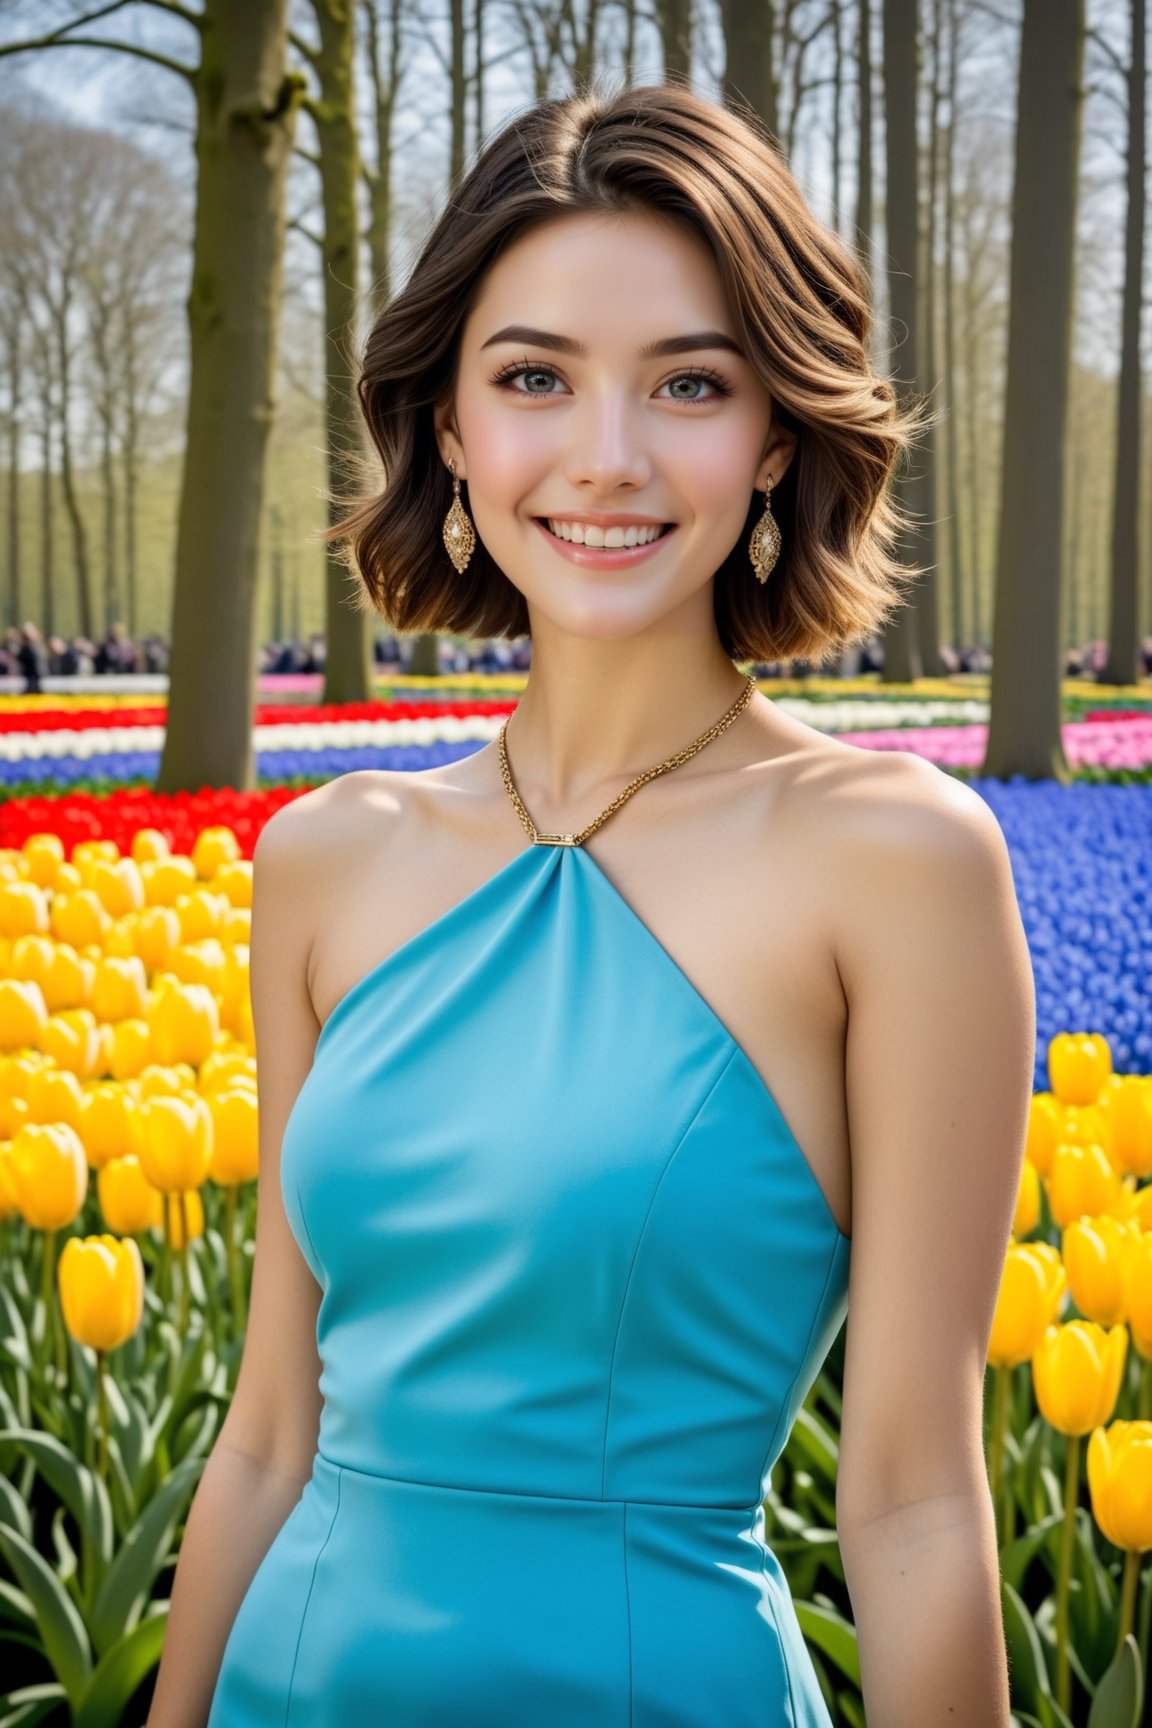 (Hyper-Realistic) photo of a girl,20yo,clear facial features,shiny skin,earrings,necklace,smile, mesmerizing,disheveled blowing short bobcut,perfect female form,perfect body proportion,perfect anatomy,elegant form-fitting short dress,( Turquoise,Baby Blue,Mustard Yellow,Gray color),(fullbody:1.3),(shoes:1.3)
BREAK
(backdrop of one of the largest and most spectacular flower gardens in the world, also known as the “Garden of Europe”. Located in the Dutch town of Lisse, the park spans over 79 acres and features tulips, daffodils, hyacinths, and other spring flowers. Keukenhof Gardens, where more than 7 million bulbs, including flowers, are planted each year)
BREAK
rule of thirds,perfect composition,depth of perspective,studio photo,trending on artstation,(Masterpiece,Best quality,sharp focus,high contrast,HDR,hyper-detailed,intricate details,ultra-realistic:1.3),(cinematic lighting),by Karol Bak,Gustav Klimt and Hayao Miyazaki,photo_b00ster,real_booster, ani_booster